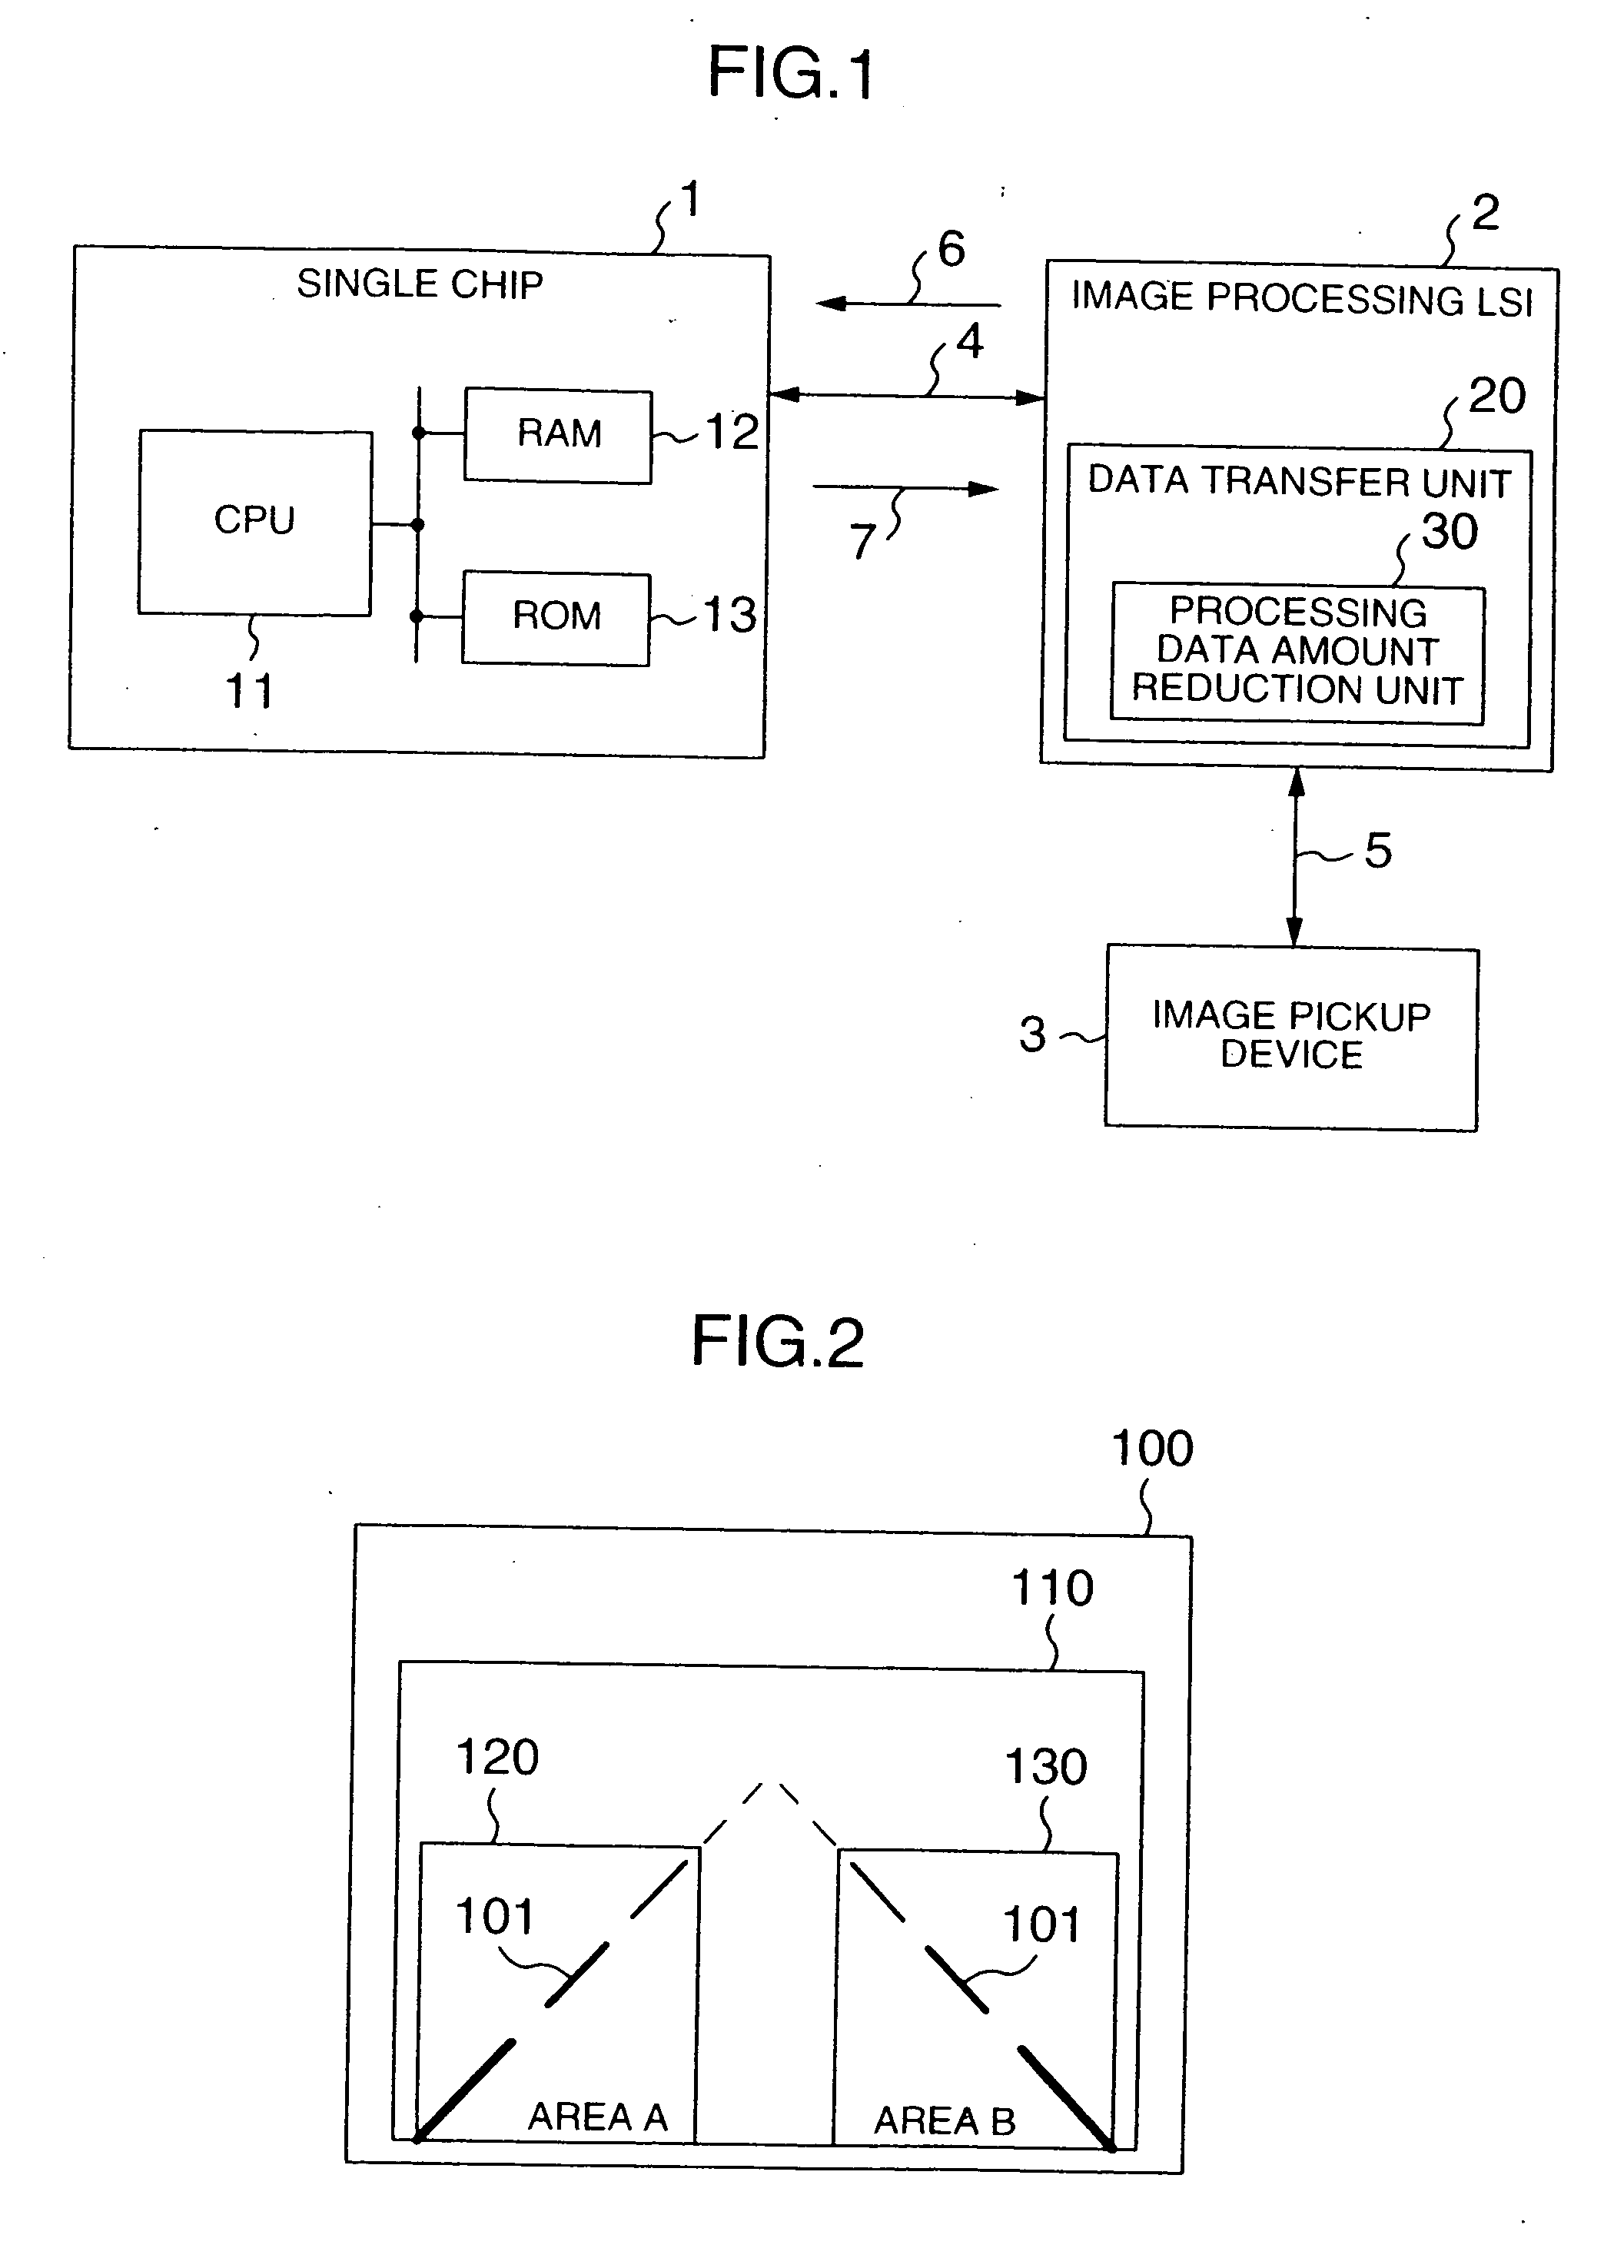 Image processing apparatus and image pickup device